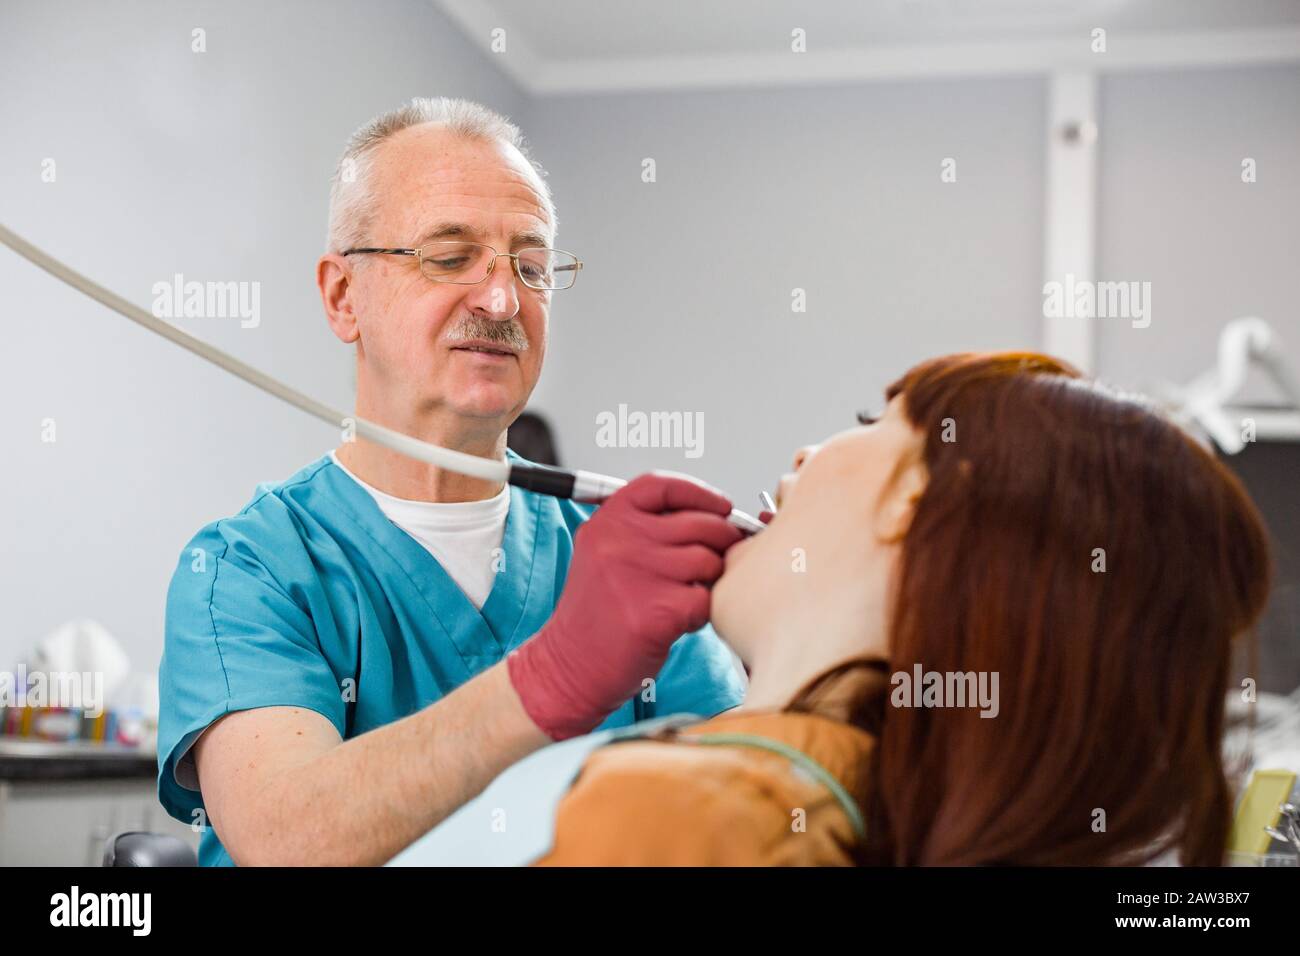 Smiling senior experienced man dentist performing dental treatment of patients tooth. Young woman at the dentist's chair during a dental procedure. Stock Photo